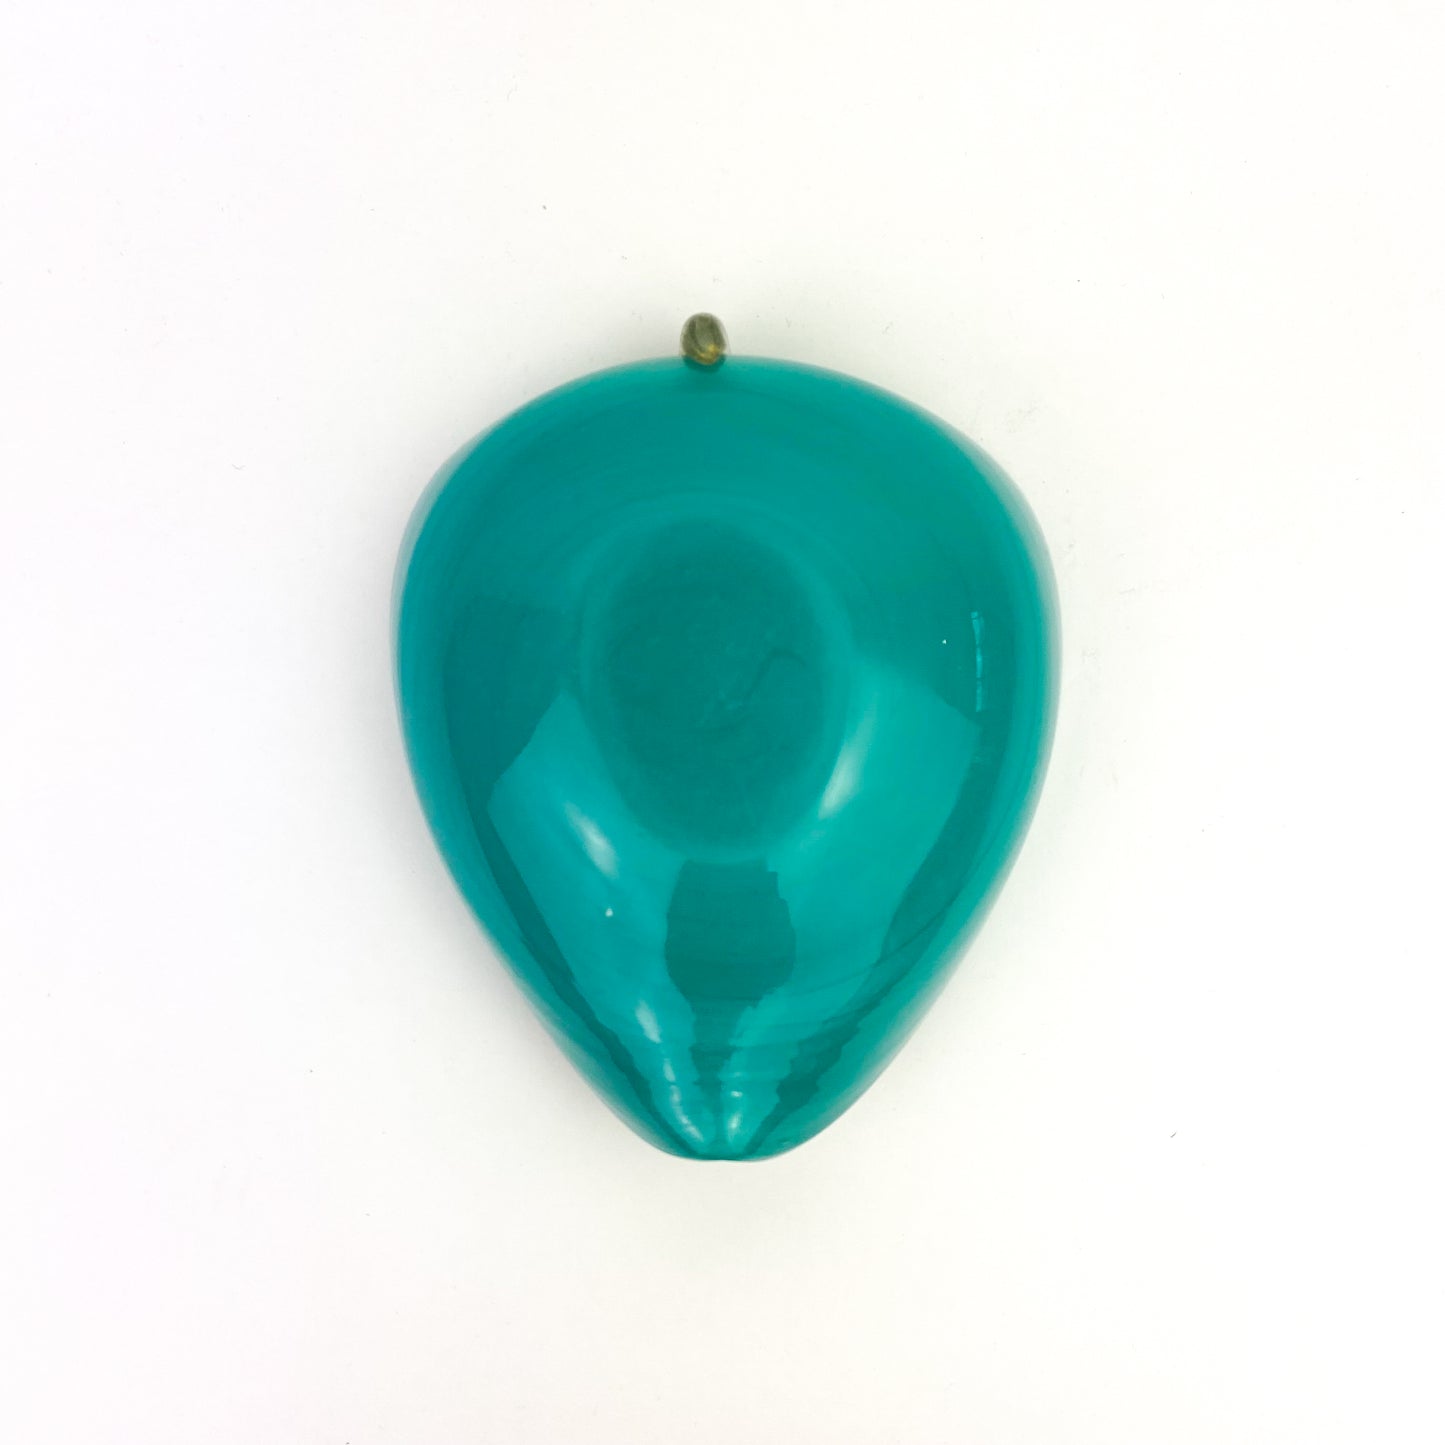 Murano Turquoise + Gold Leaf Shaped Glass Catchall/Ashtray #O788